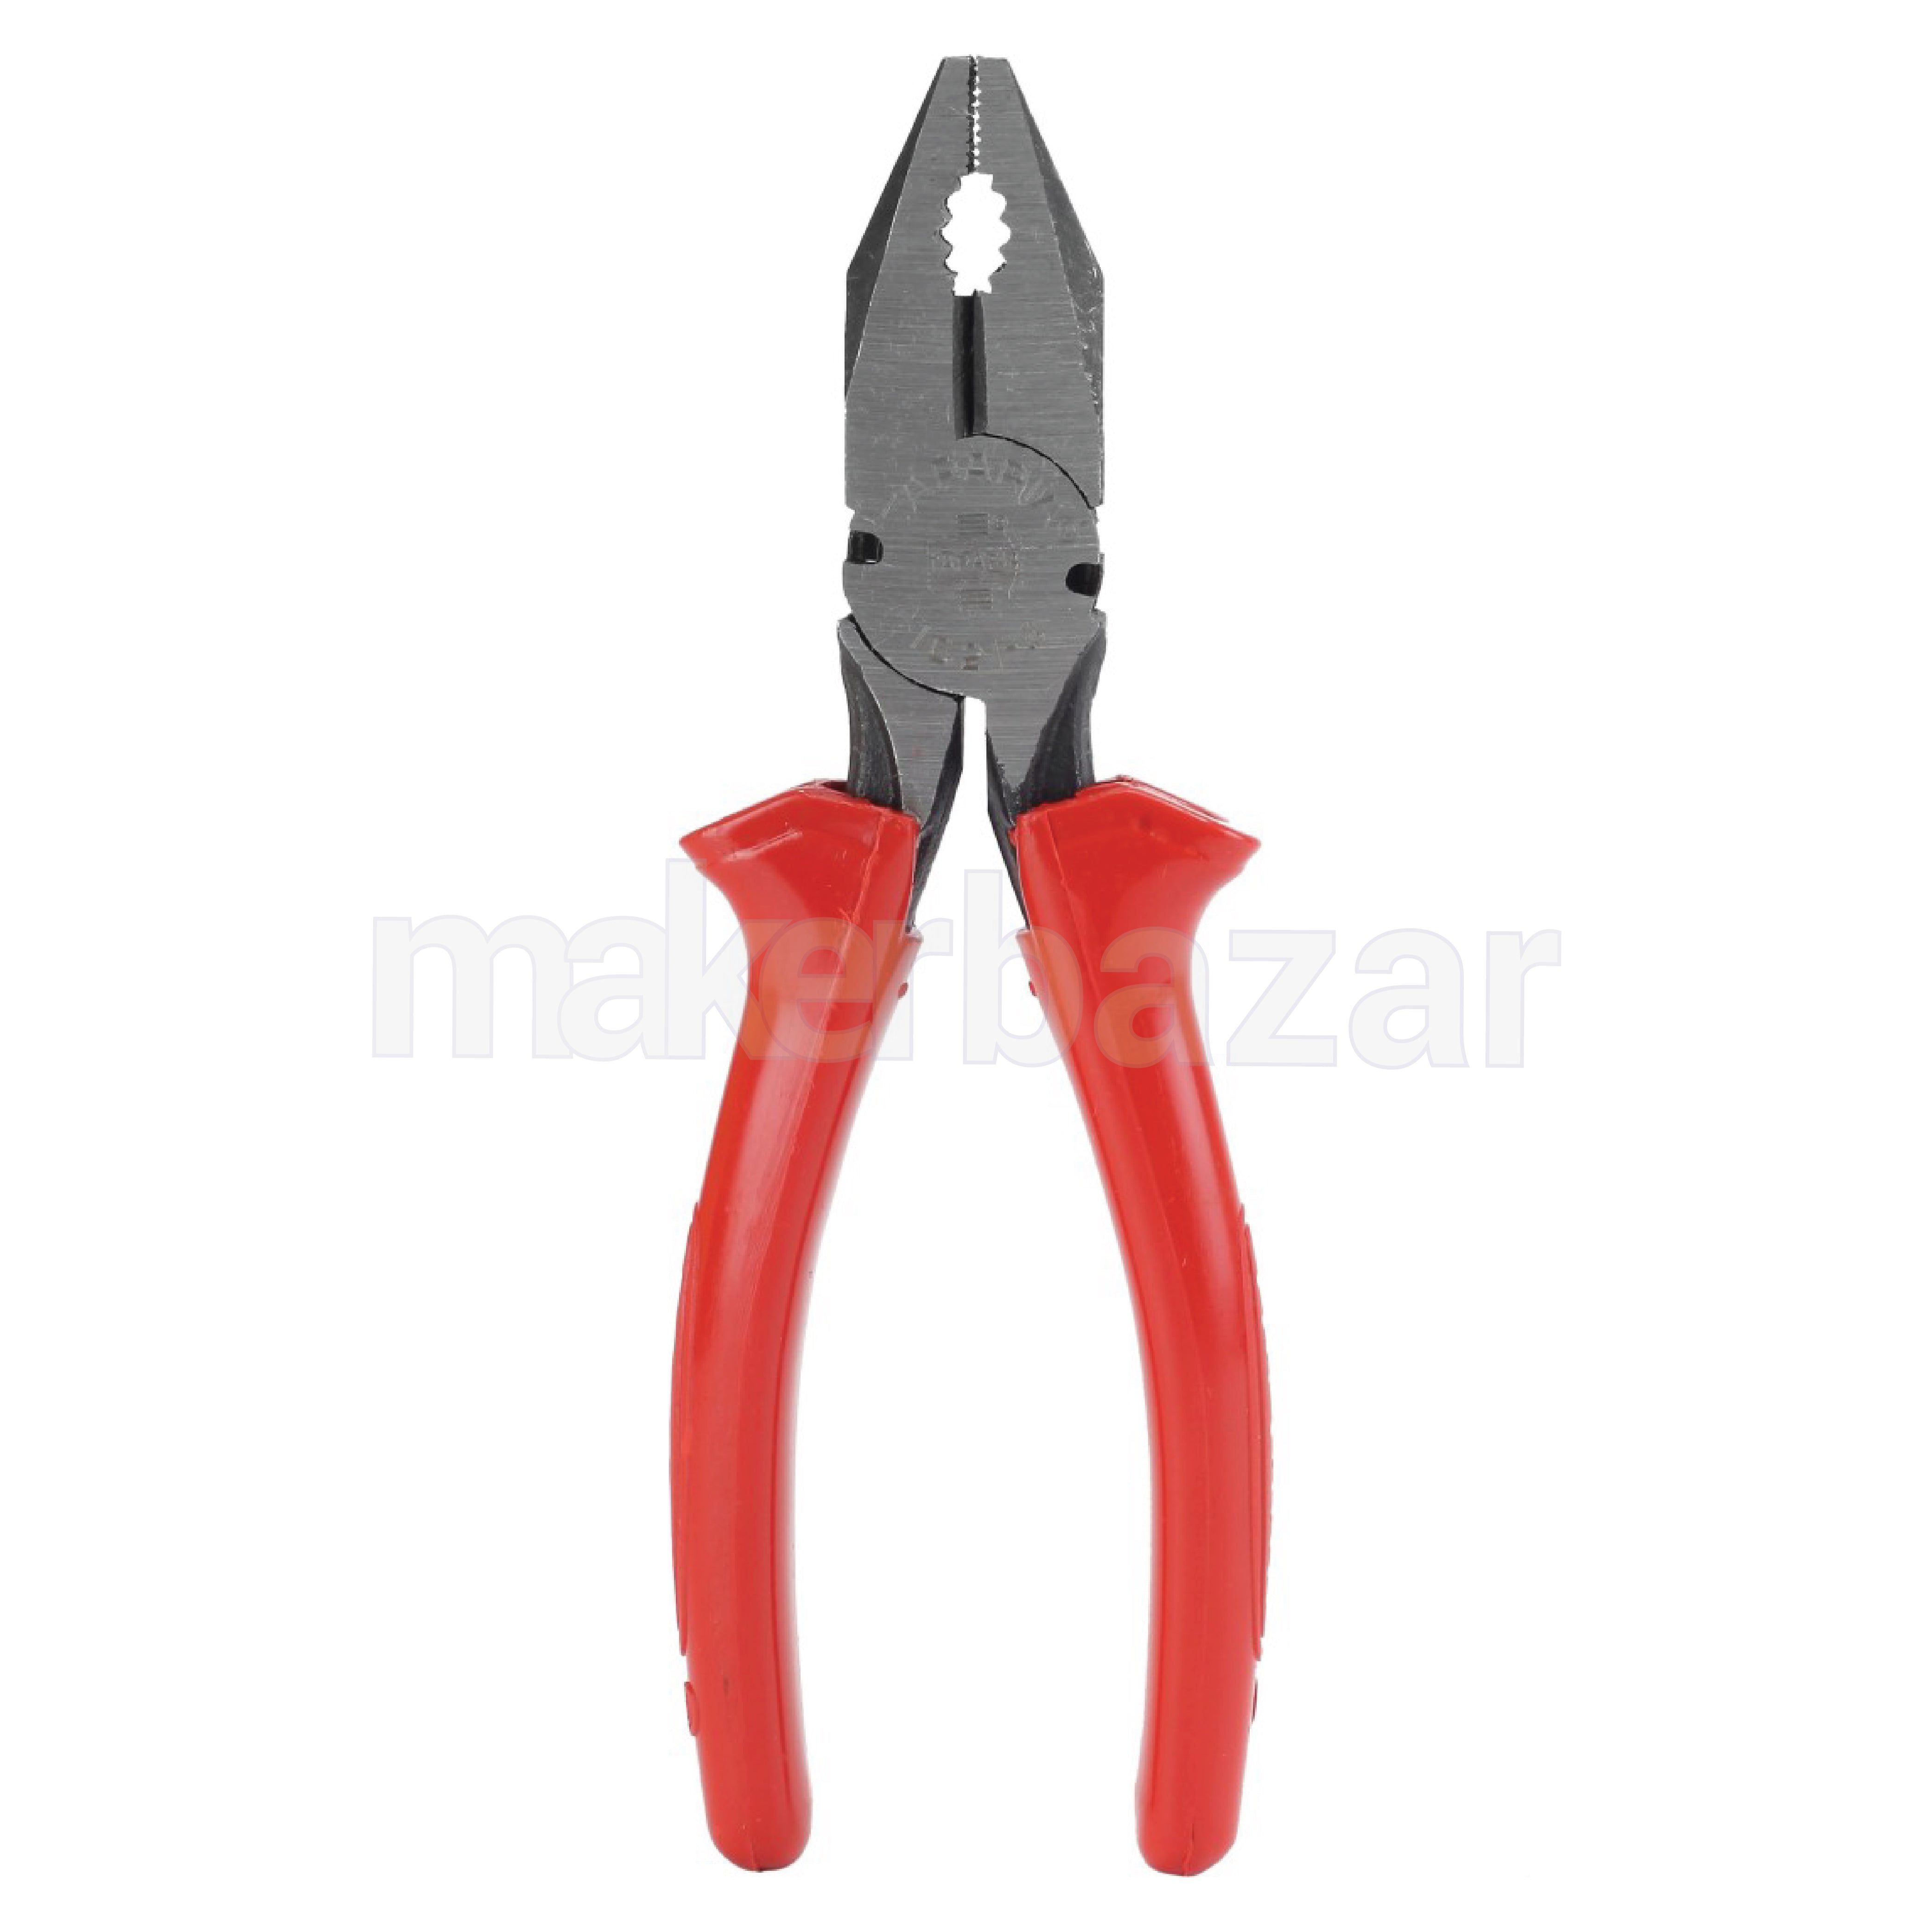 Taparia High Speed Steel Esd Electrical Wire Cutter, For Cutting